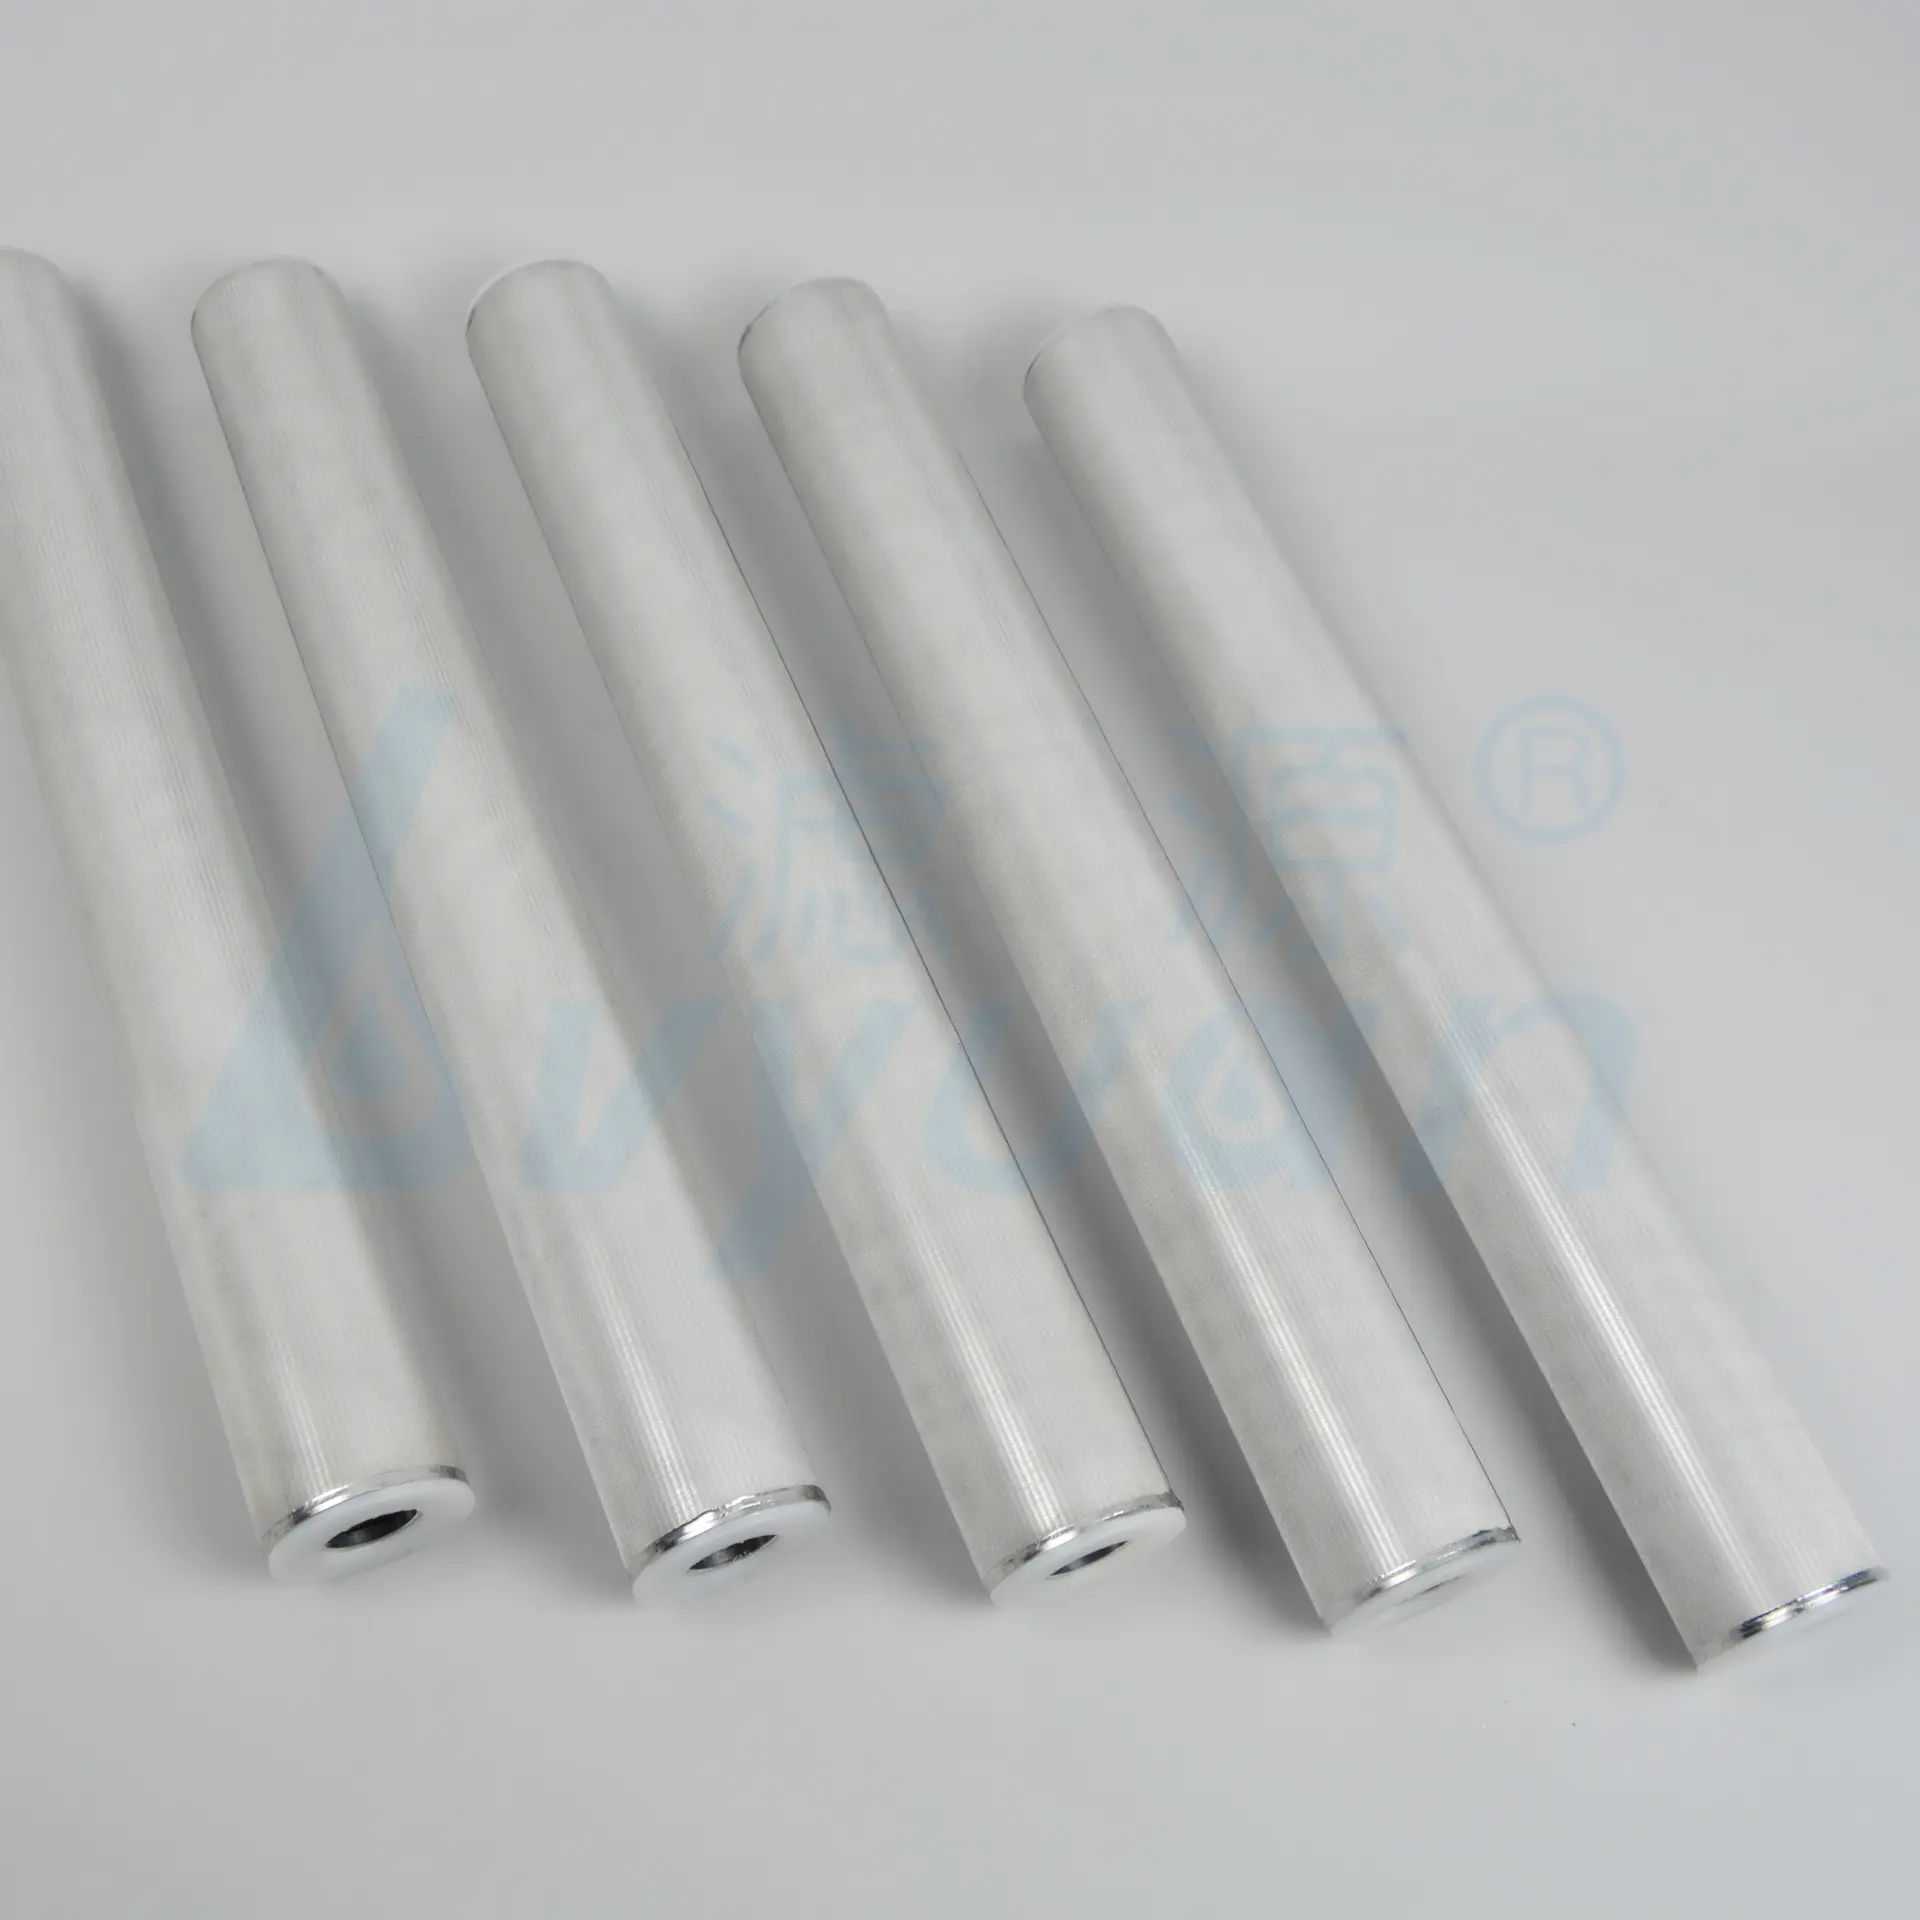 Good Quality stainless steel sintered Filter Cartridge for oil filtration and filter water